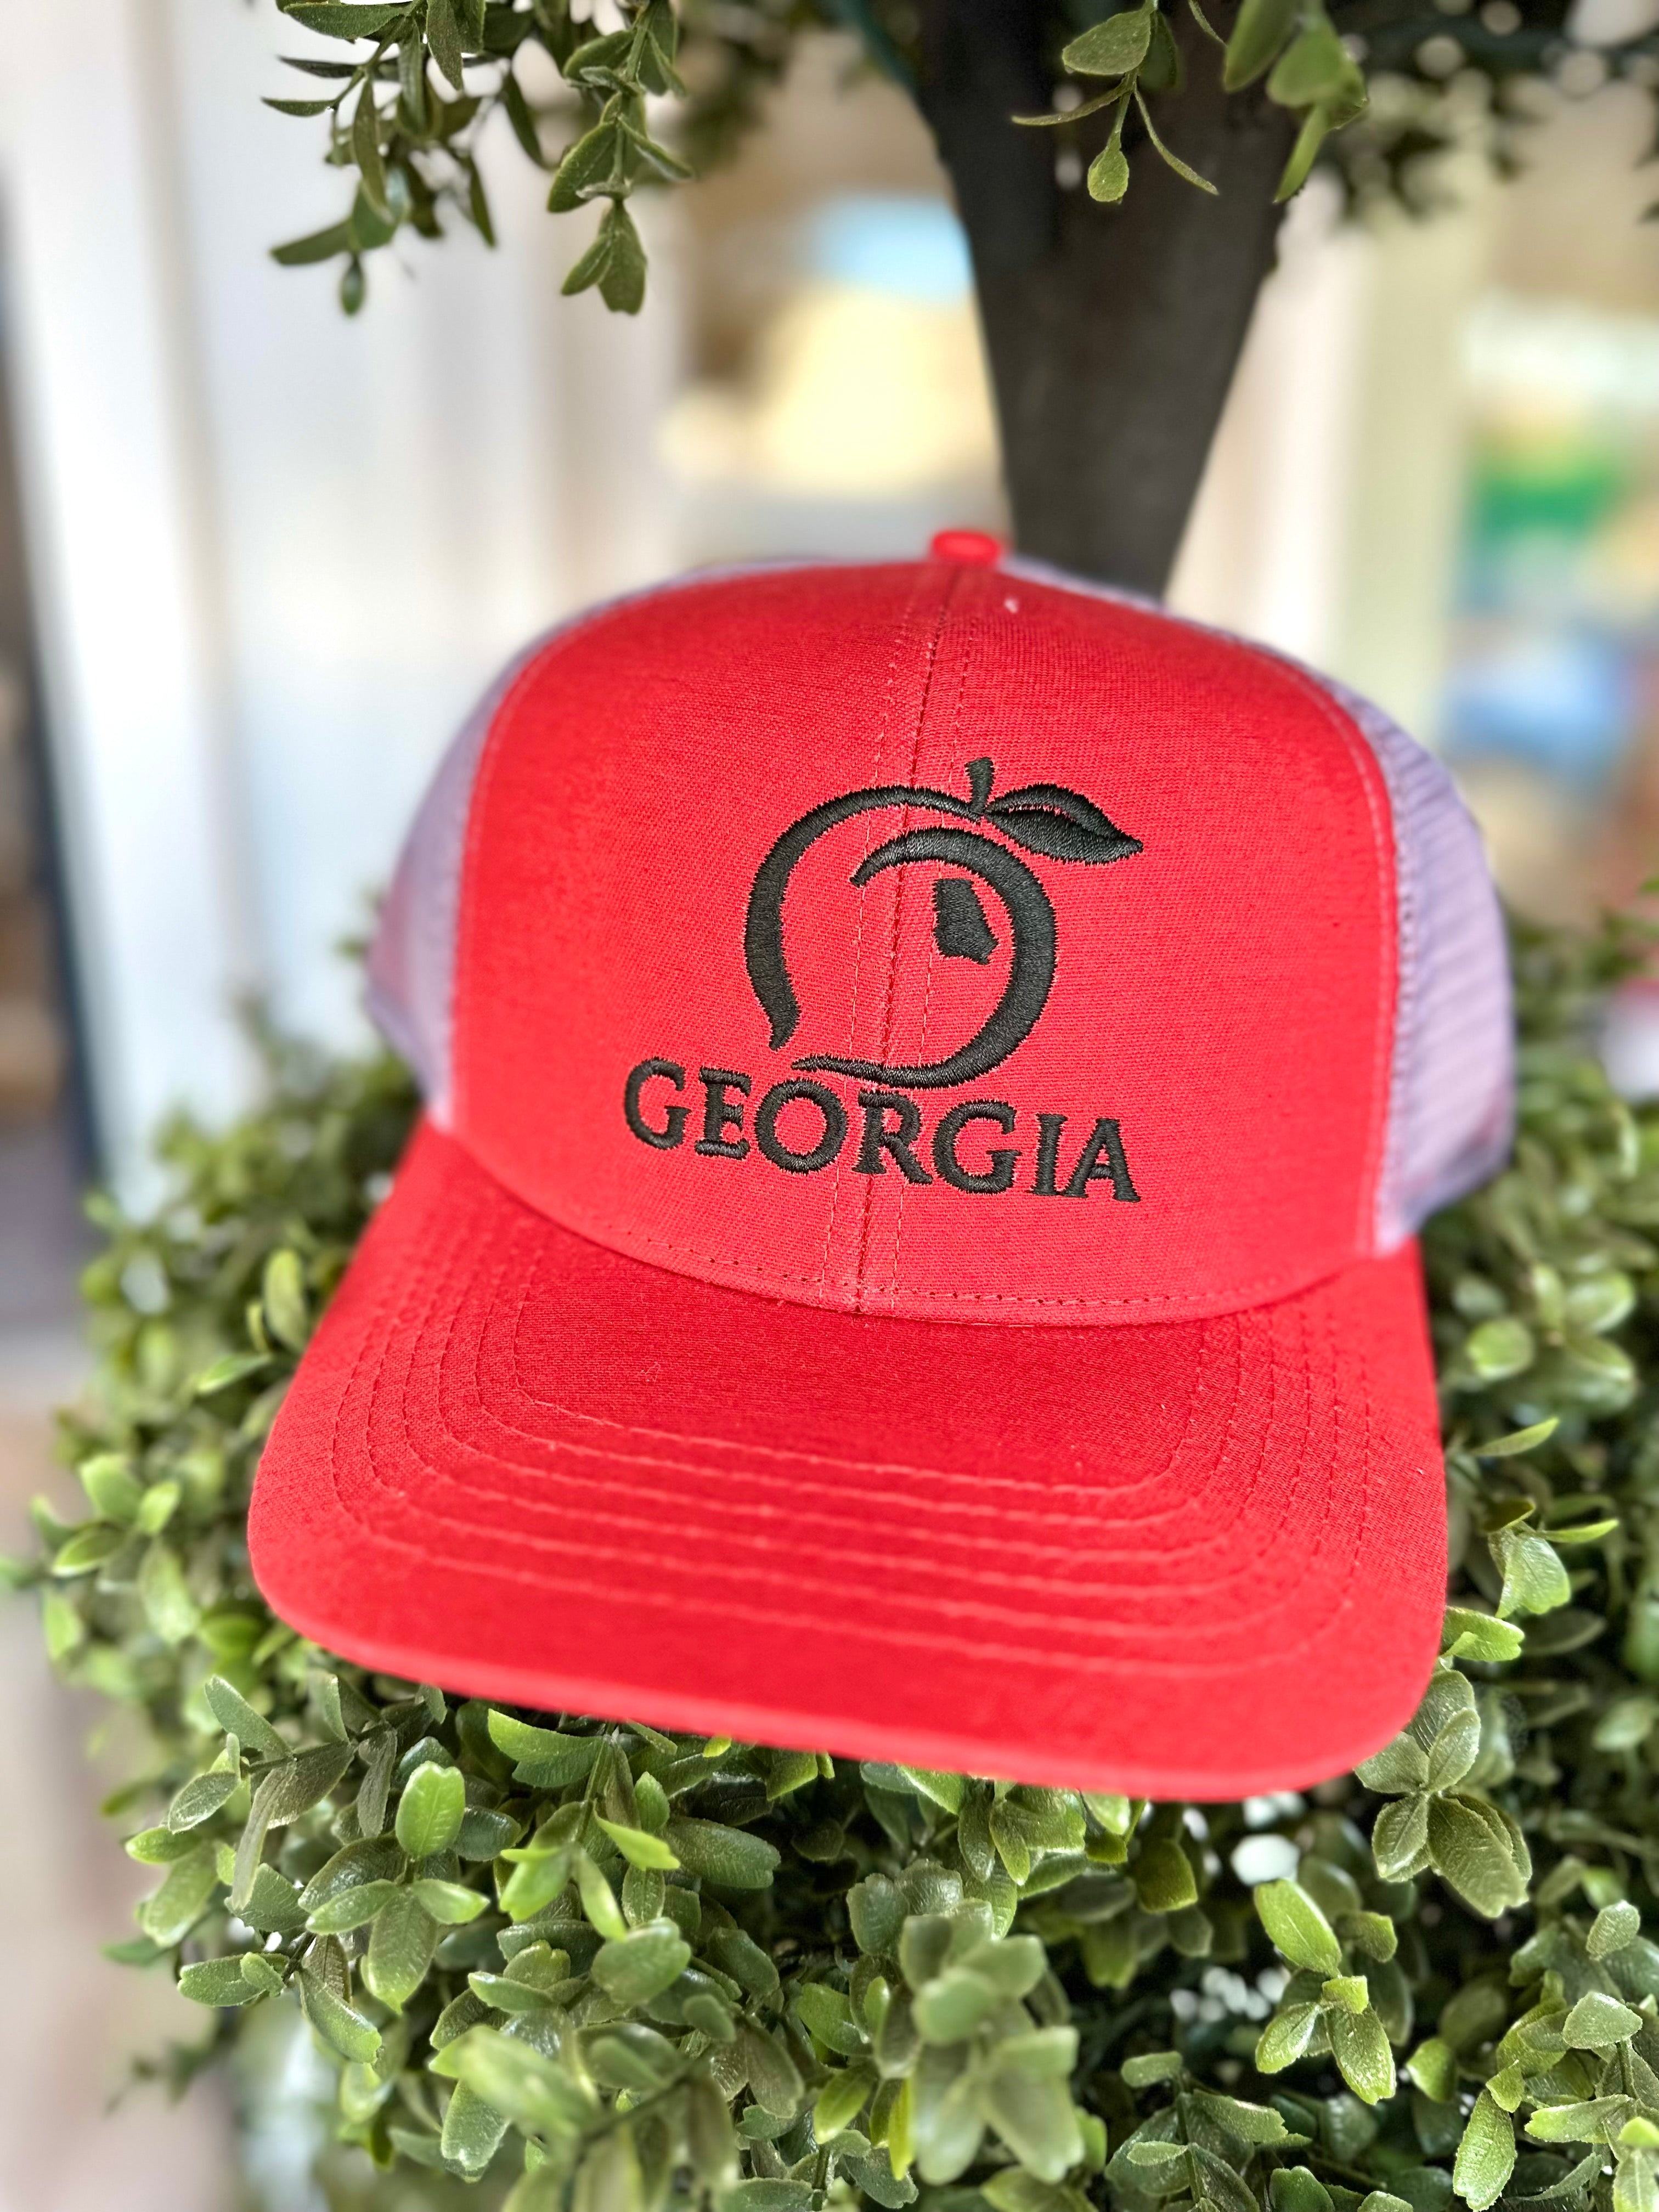 Original Georgia Trucker Hat in Red with Gray Mesh Back by Peach State Pride